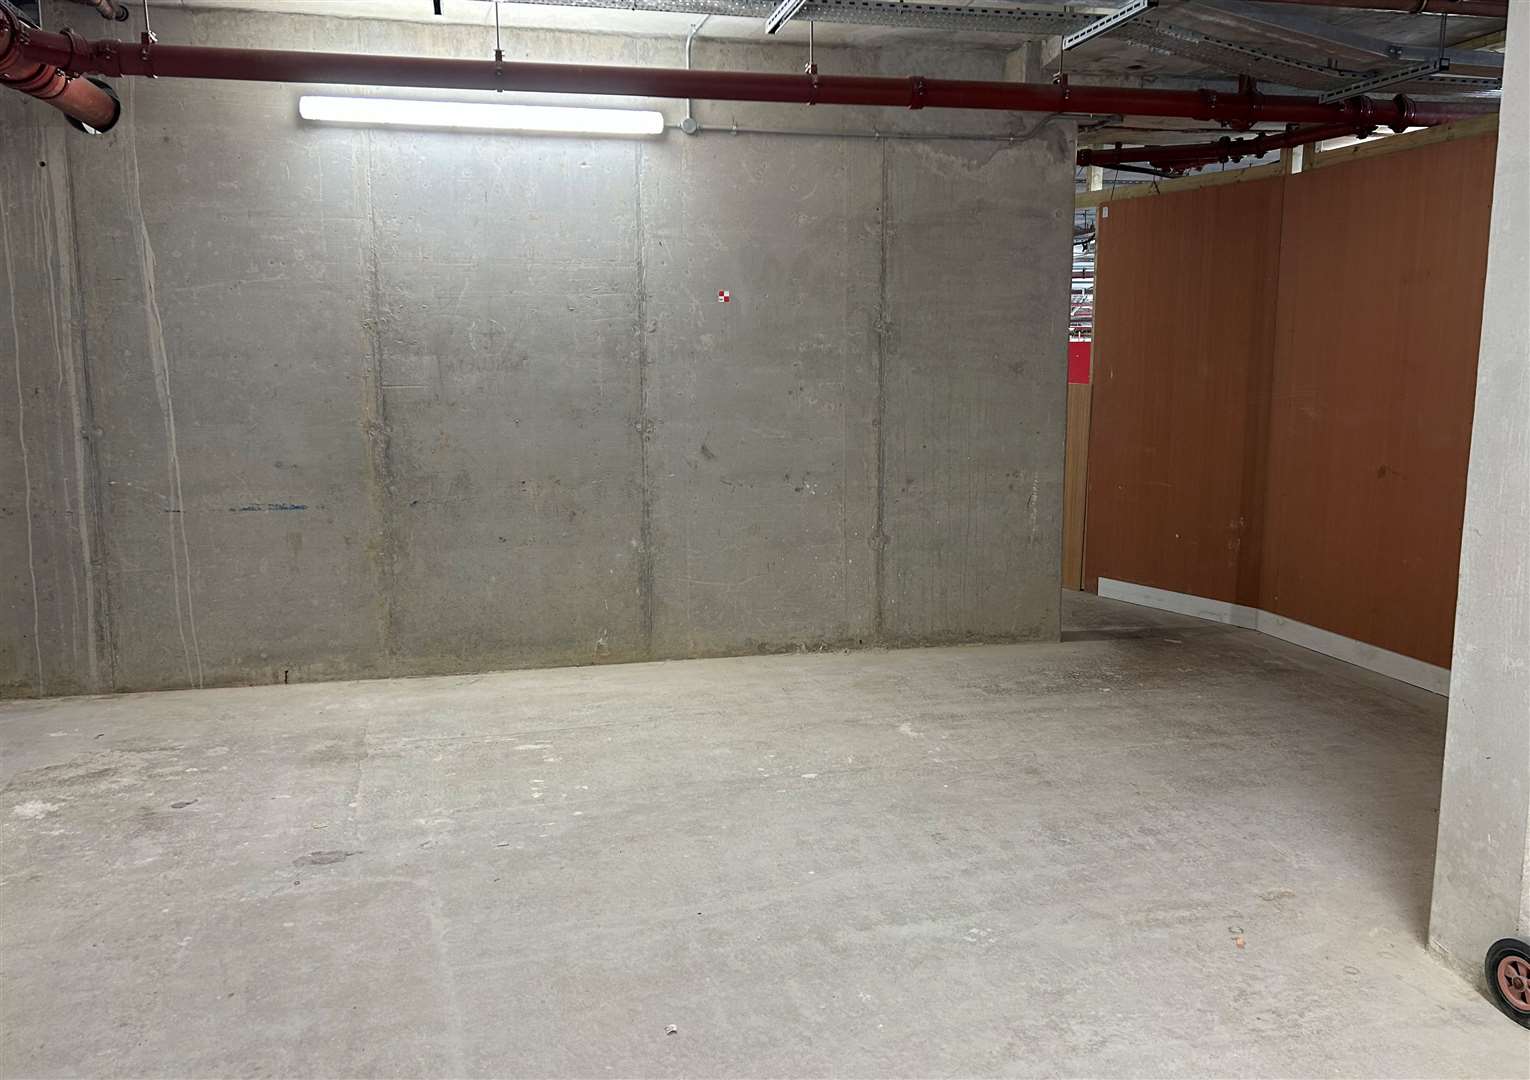 Underground parking spaces will be provided for each apartment